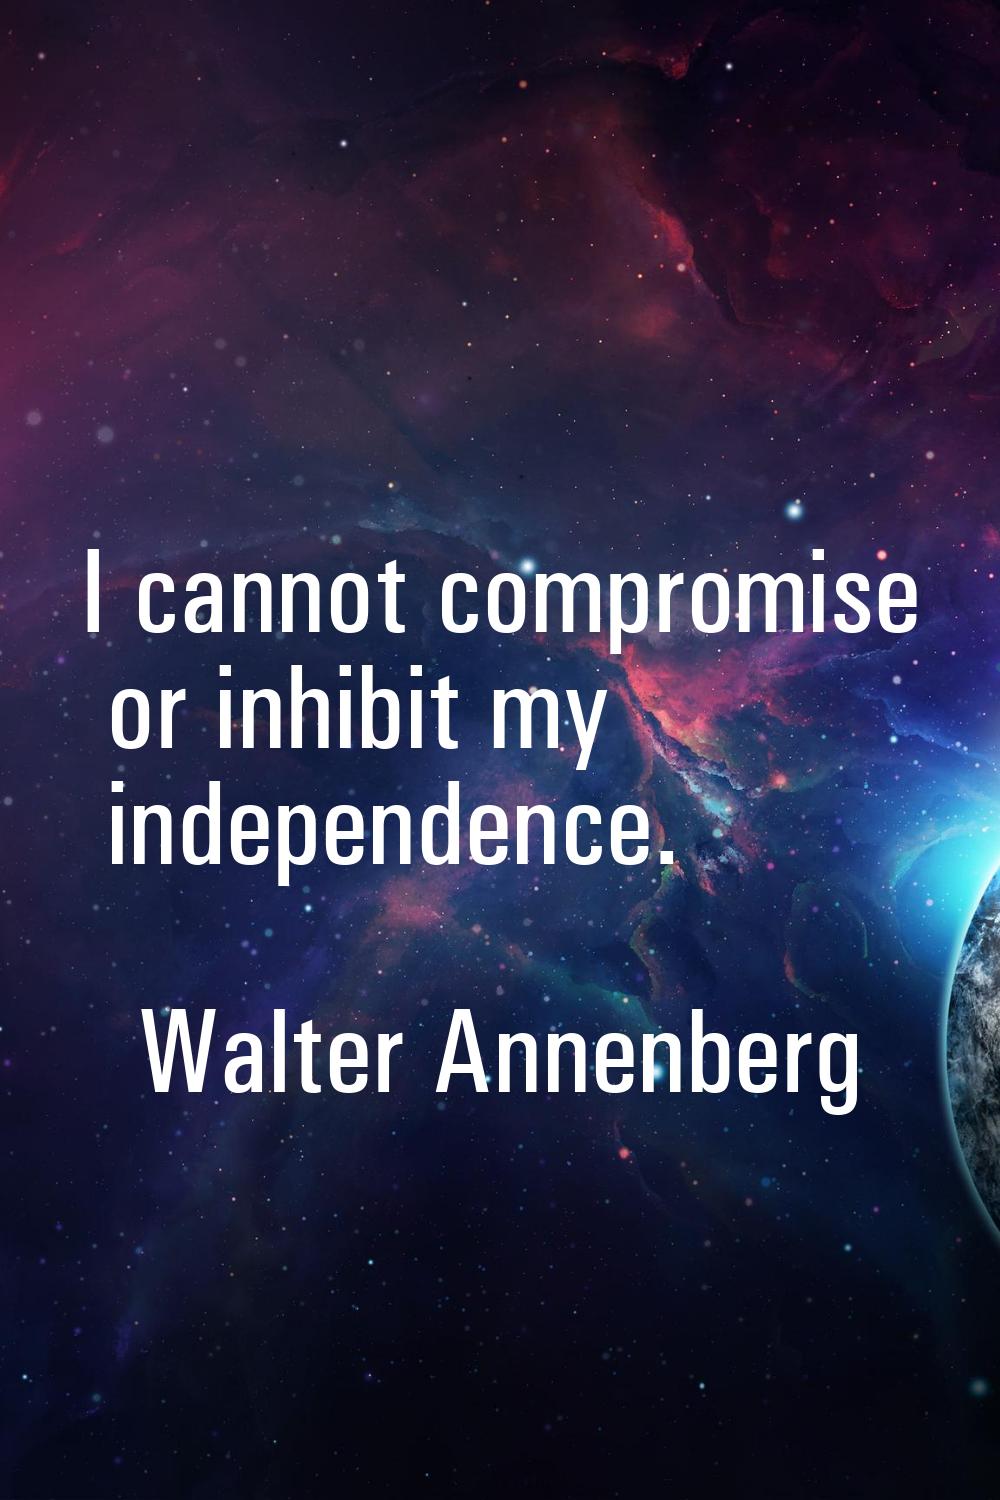 I cannot compromise or inhibit my independence.